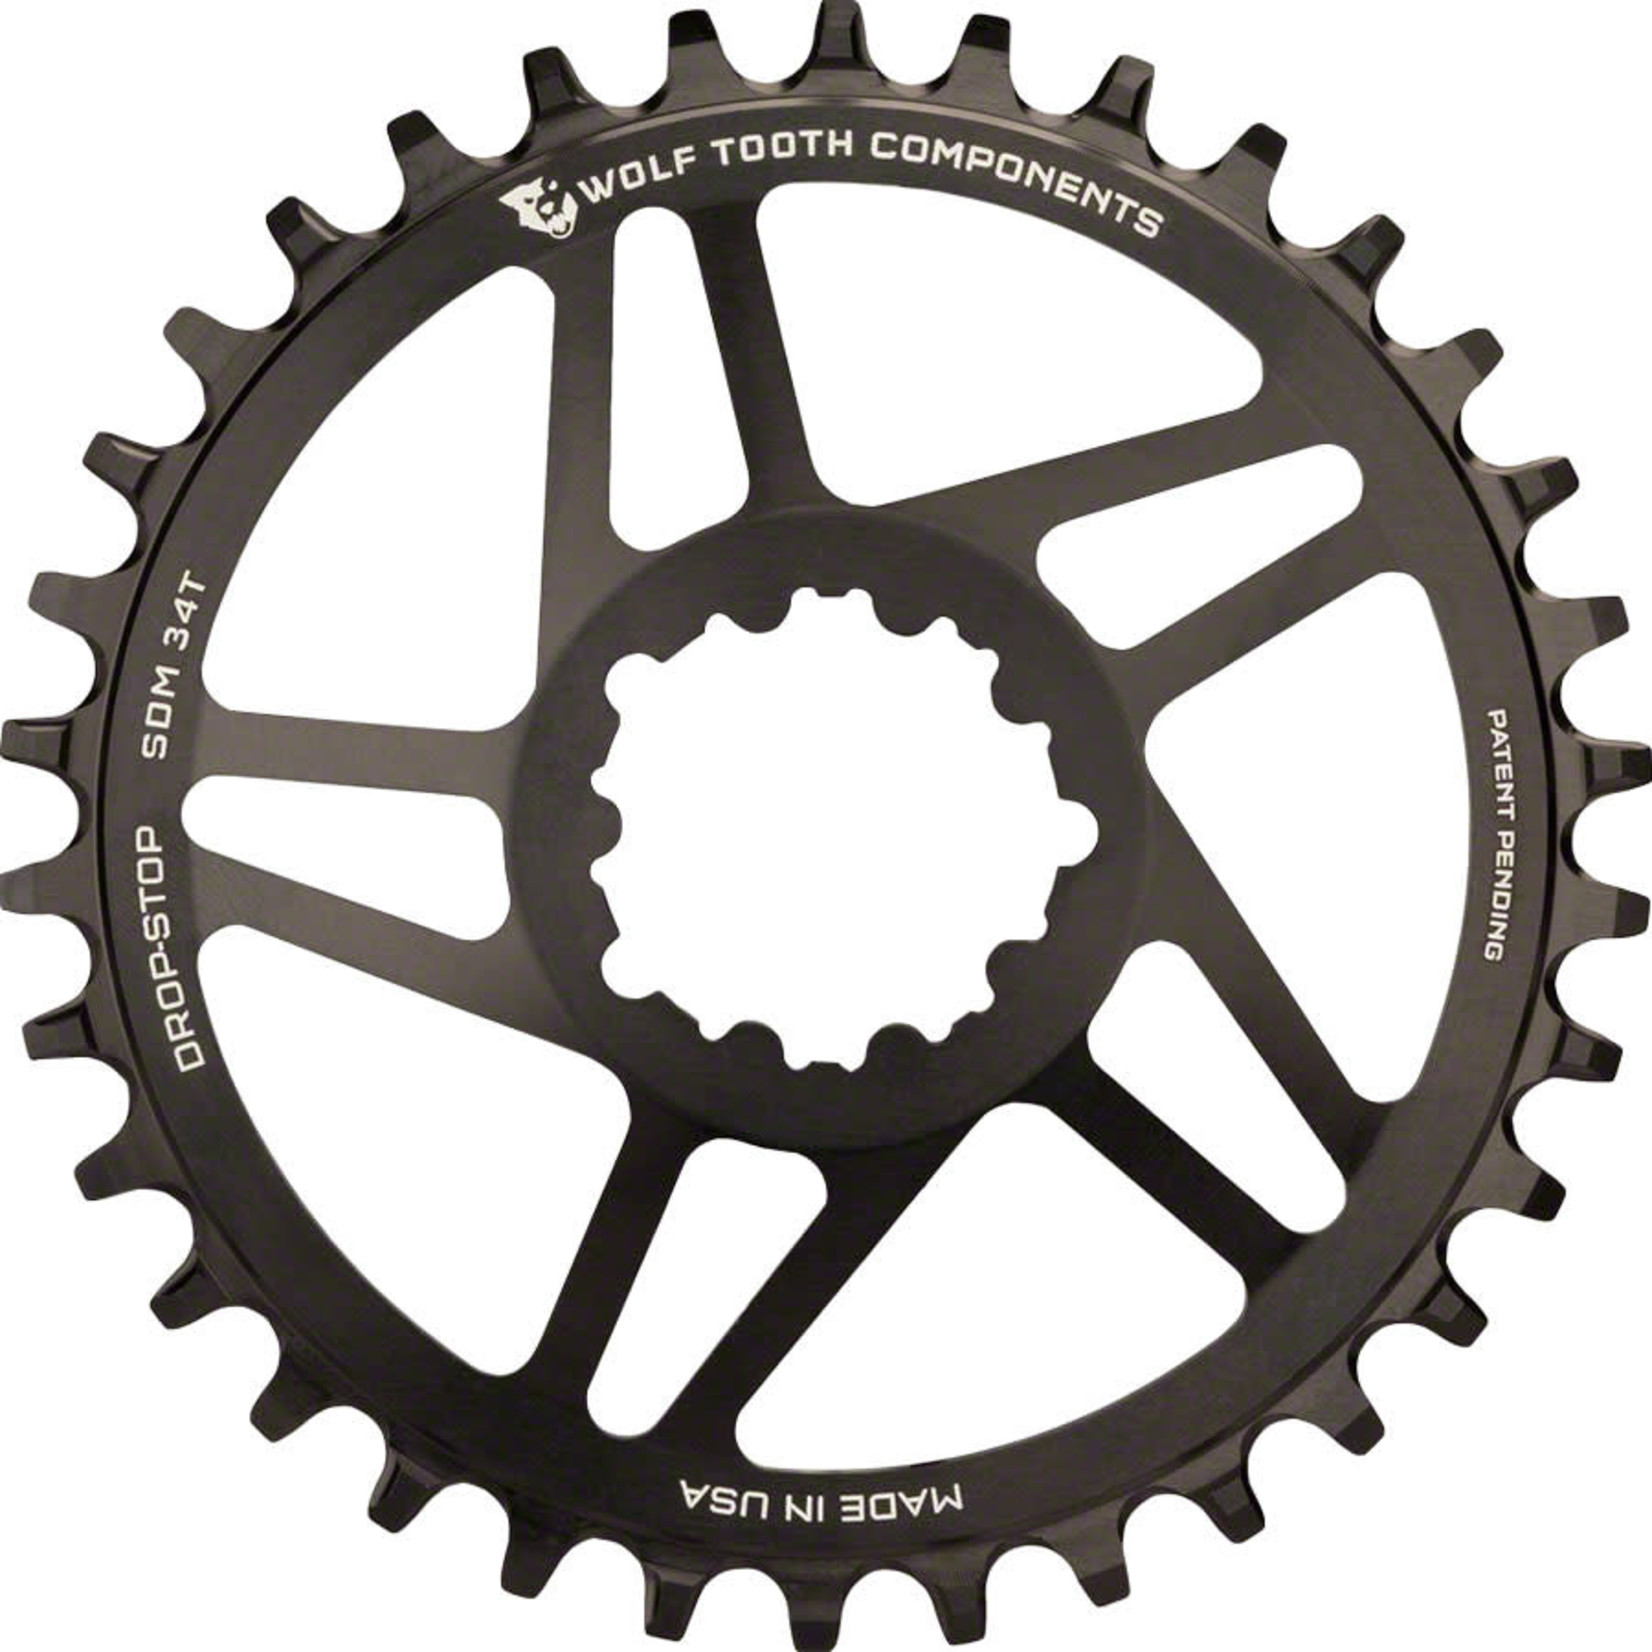 Wolf Tooth Wolf Tooth Direct Mount Chainring - 34t, SRAM Direct Mount, Drop-Stop, For SRAM 3-Bolt Cranksets, 6mm Offset, Black